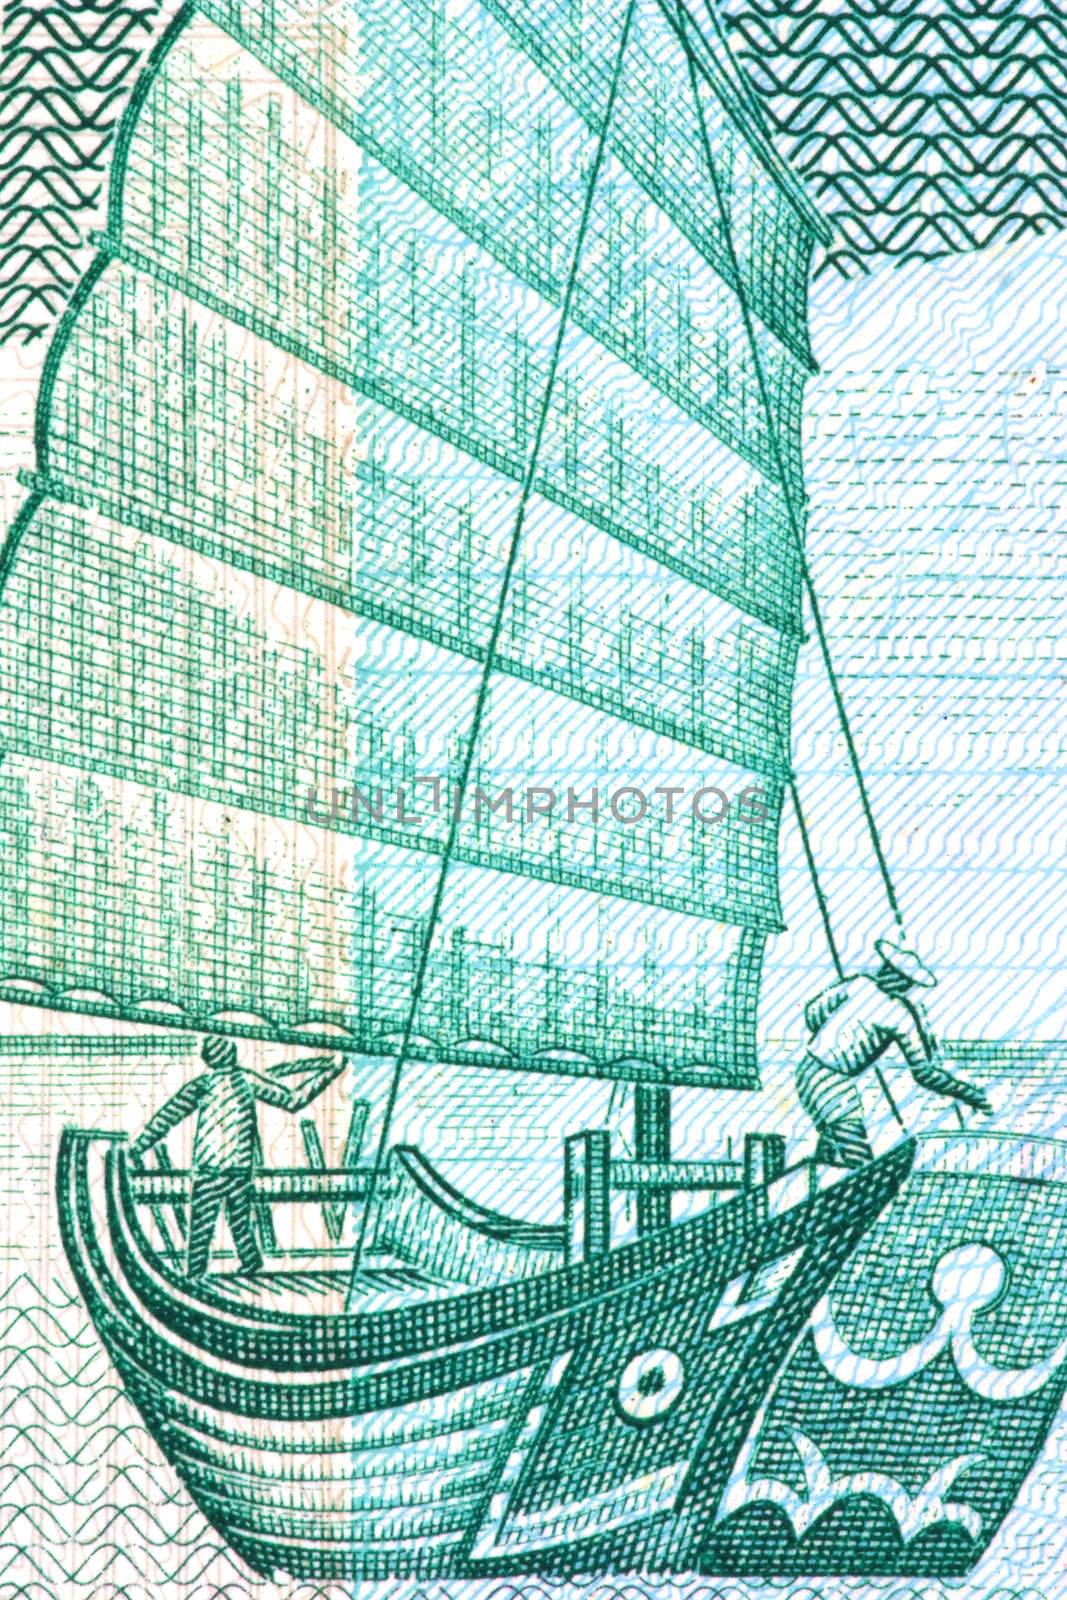 Chinese Junk on Currency Note by shariffc